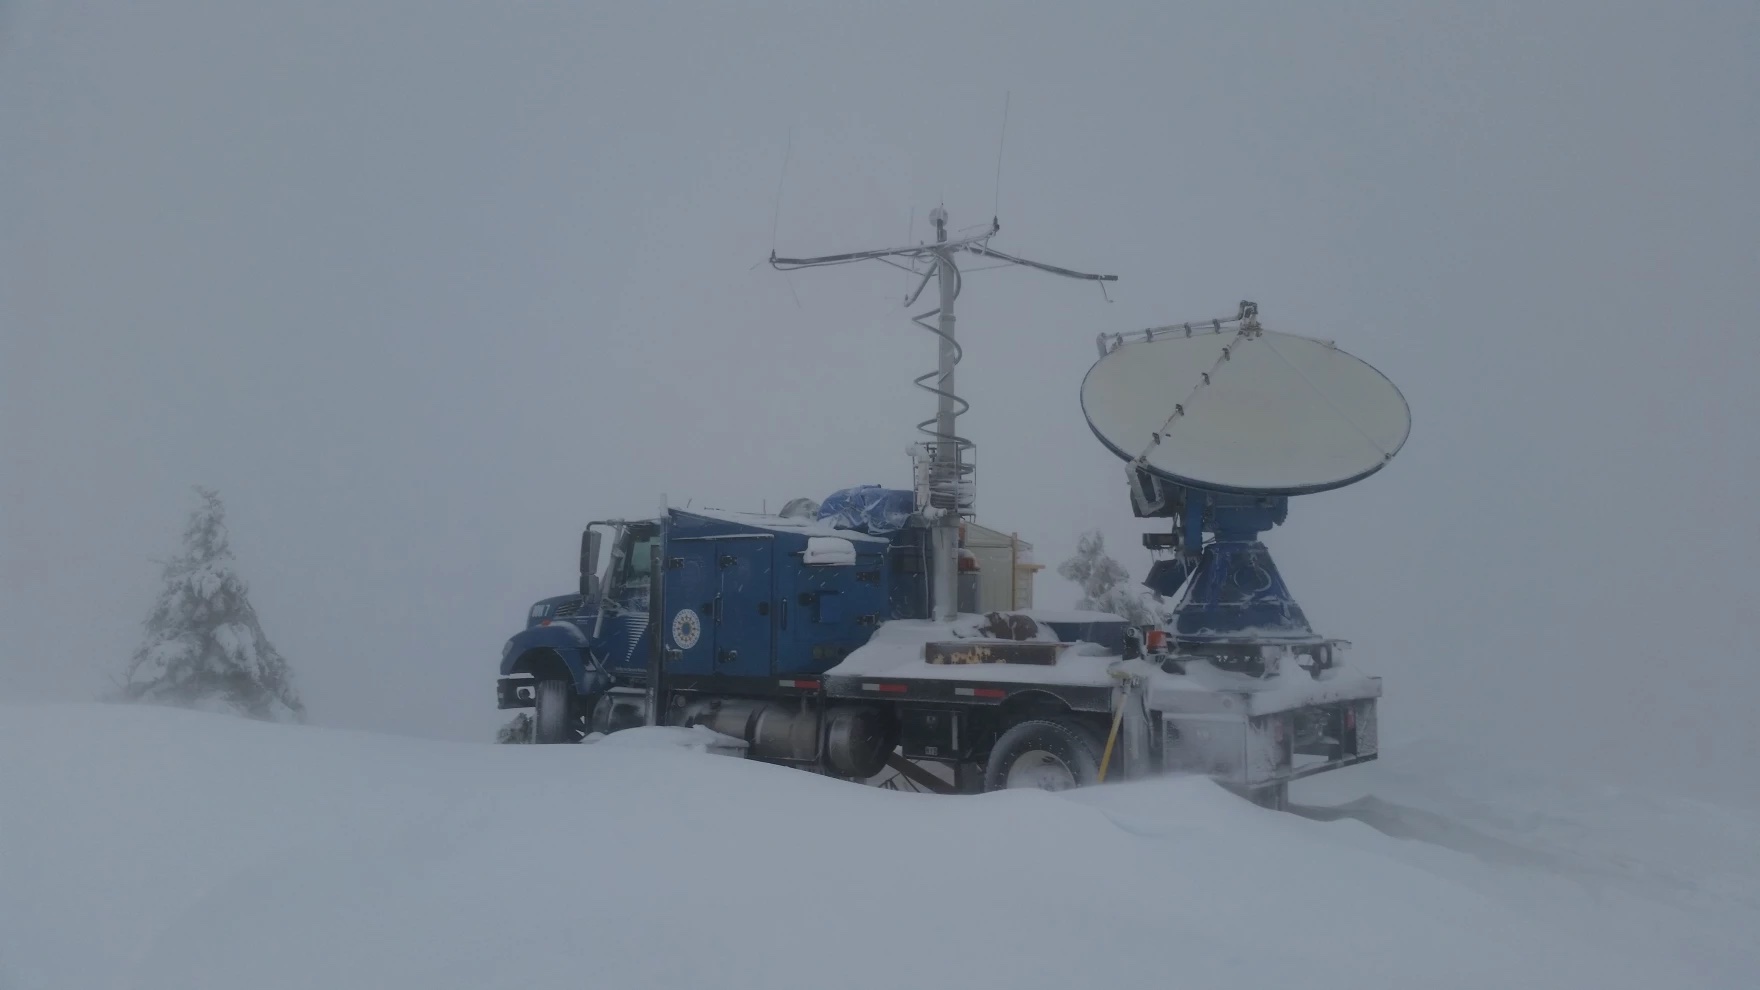 A truck with a large satellite dish in its rear carriage driving through a very snowy area.